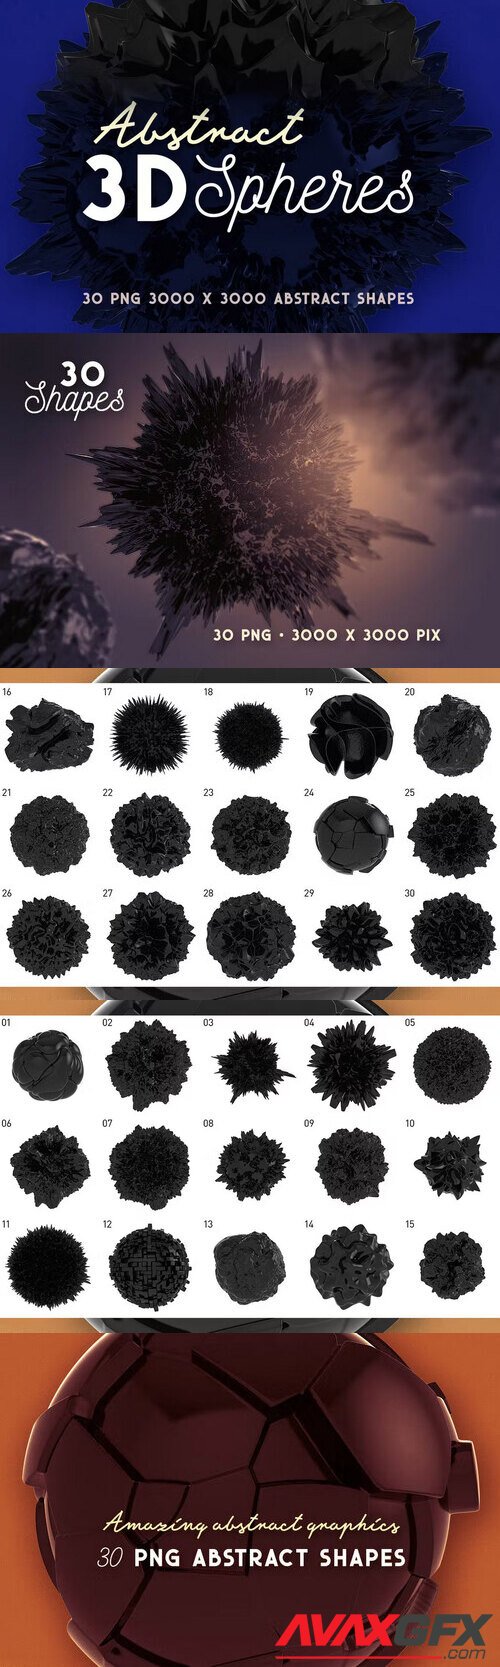 CreativeMarket - 30 Abstract 3D Spheres 4596488 